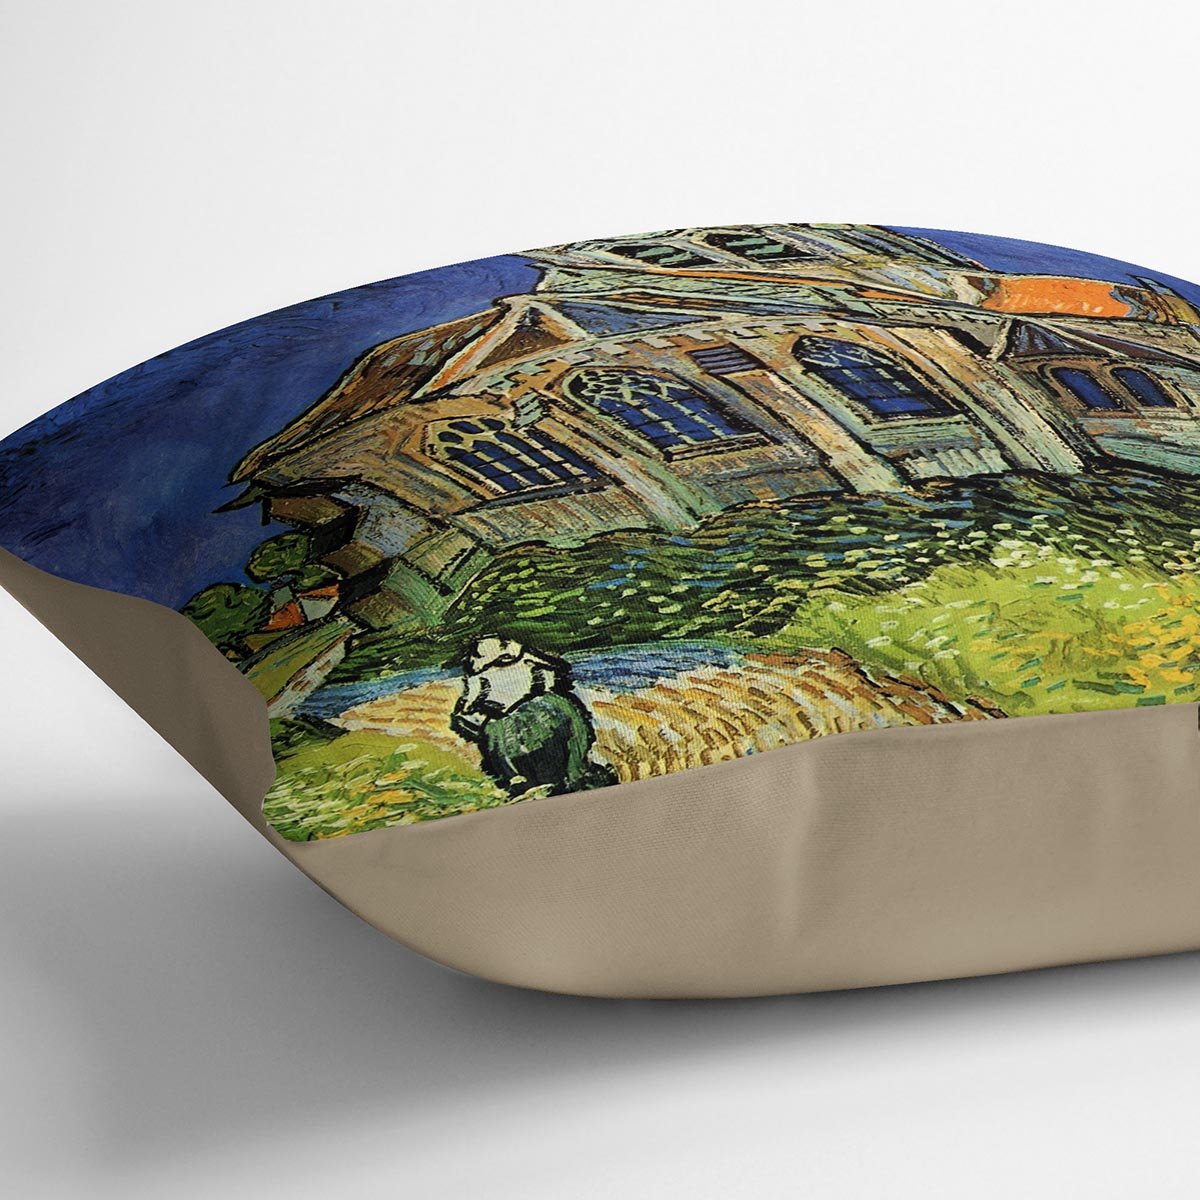 The Church at Auvers by Van Gogh Throw Pillow